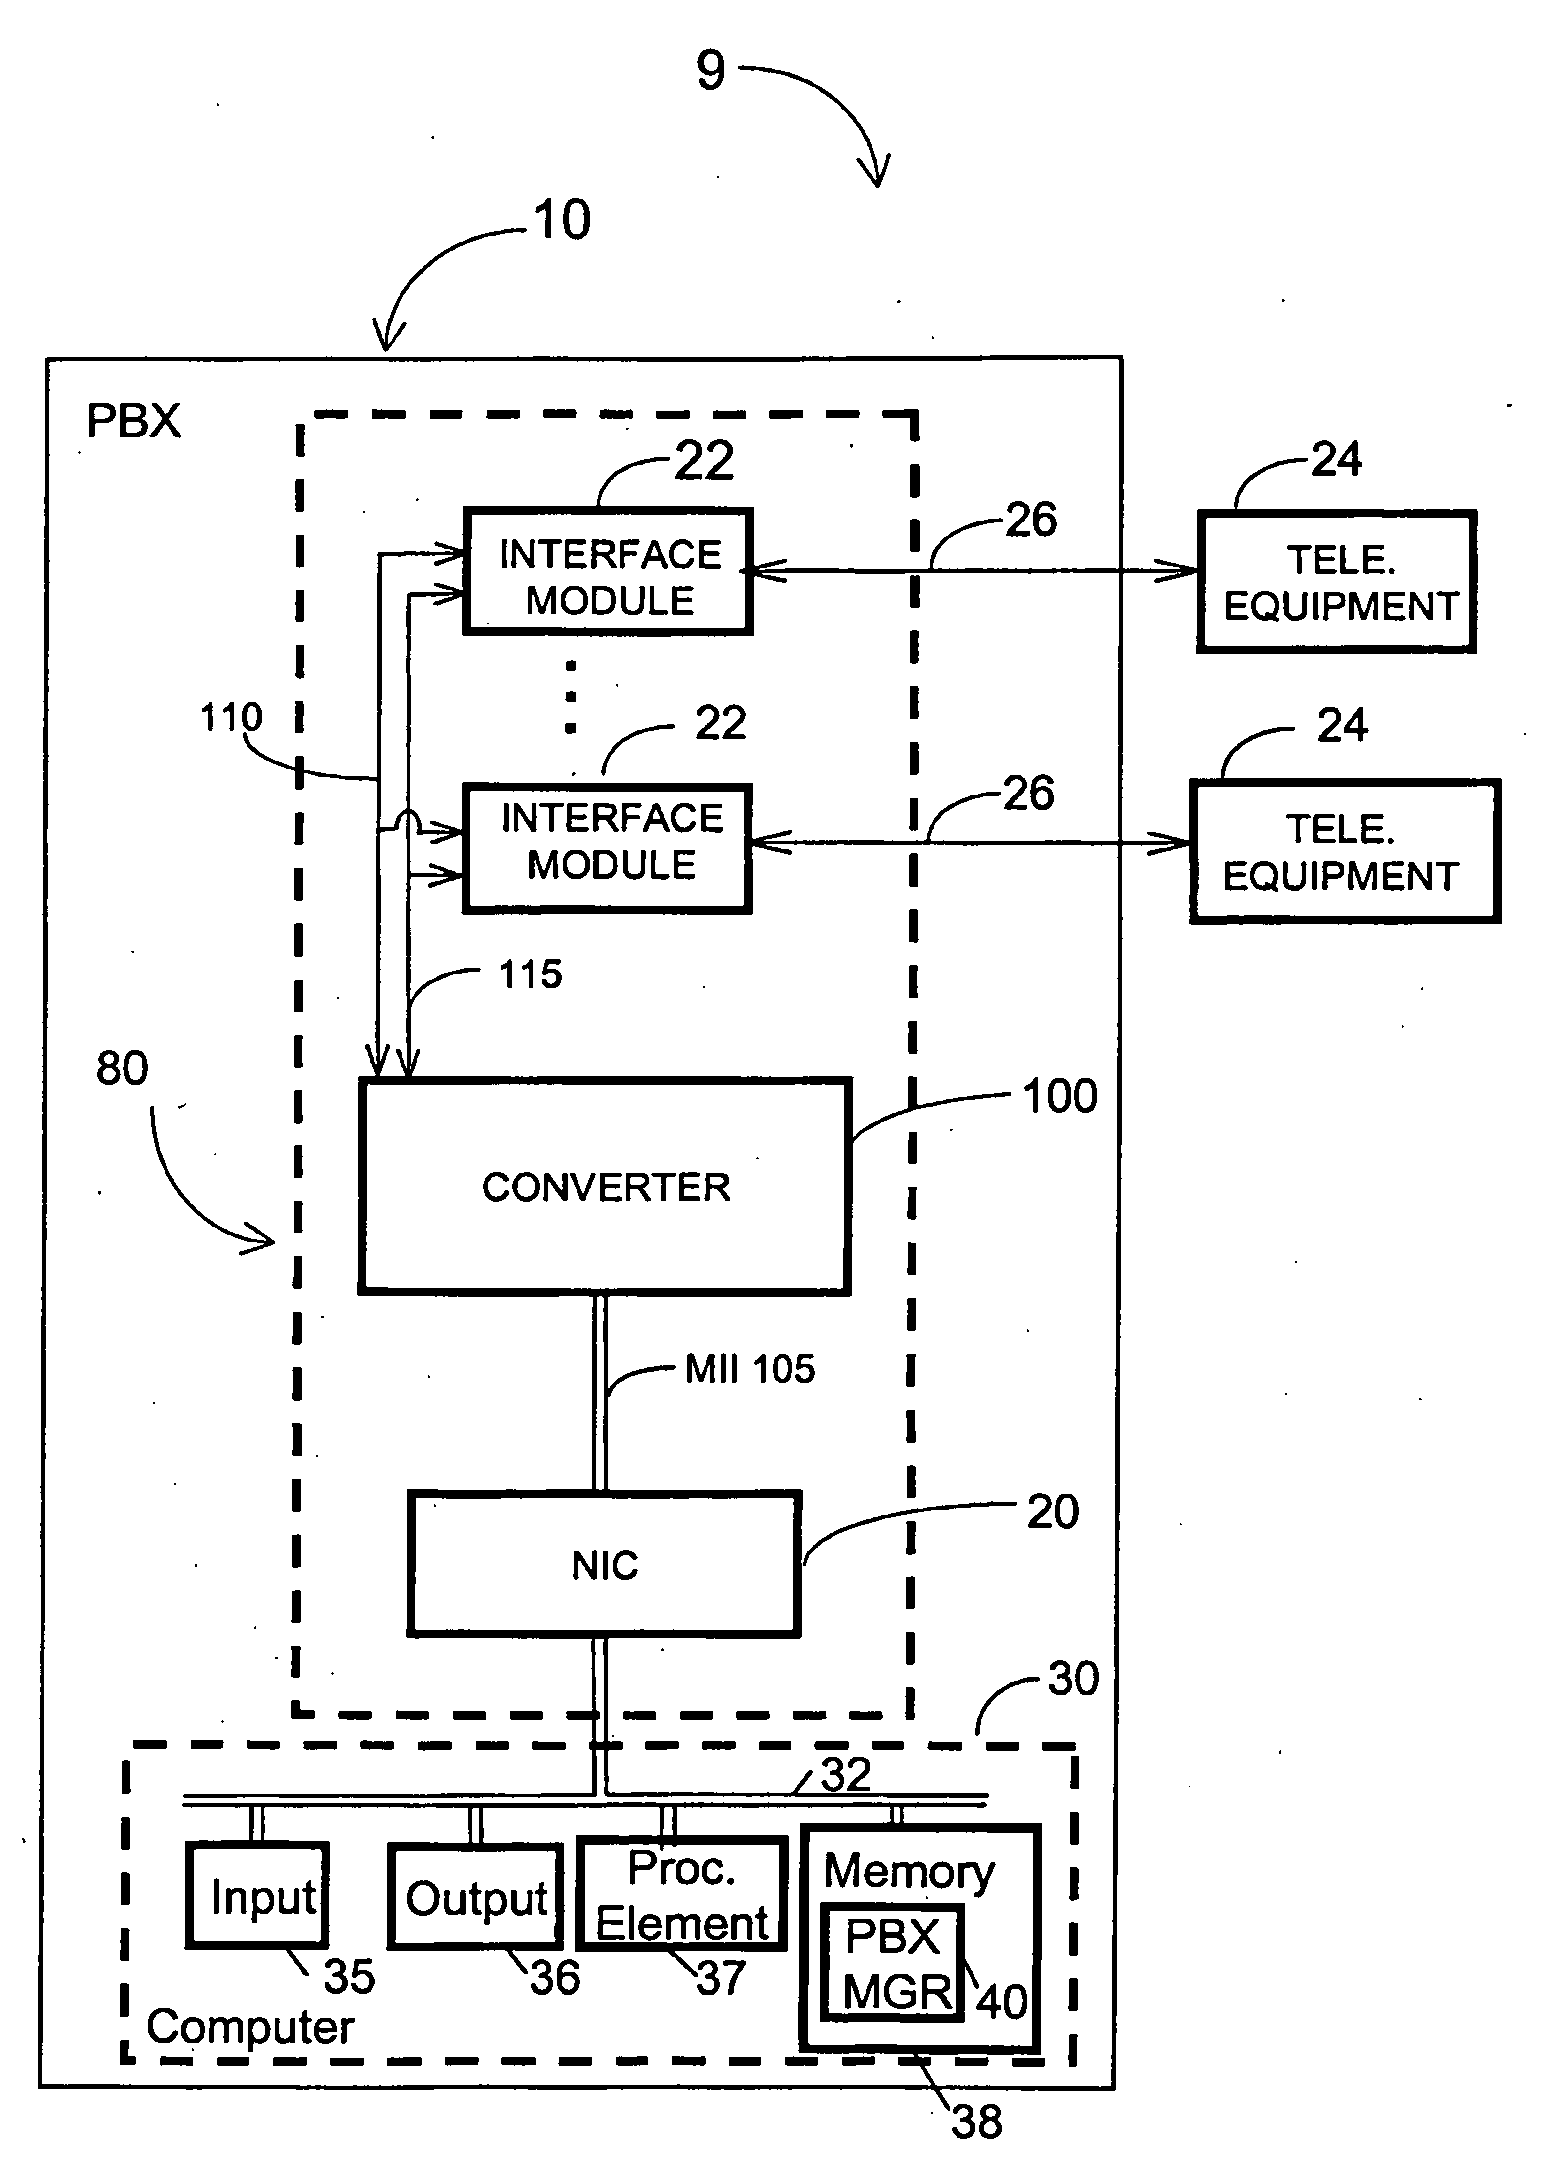 Branch exchange methods and apparatuses for switching telecommunication signals